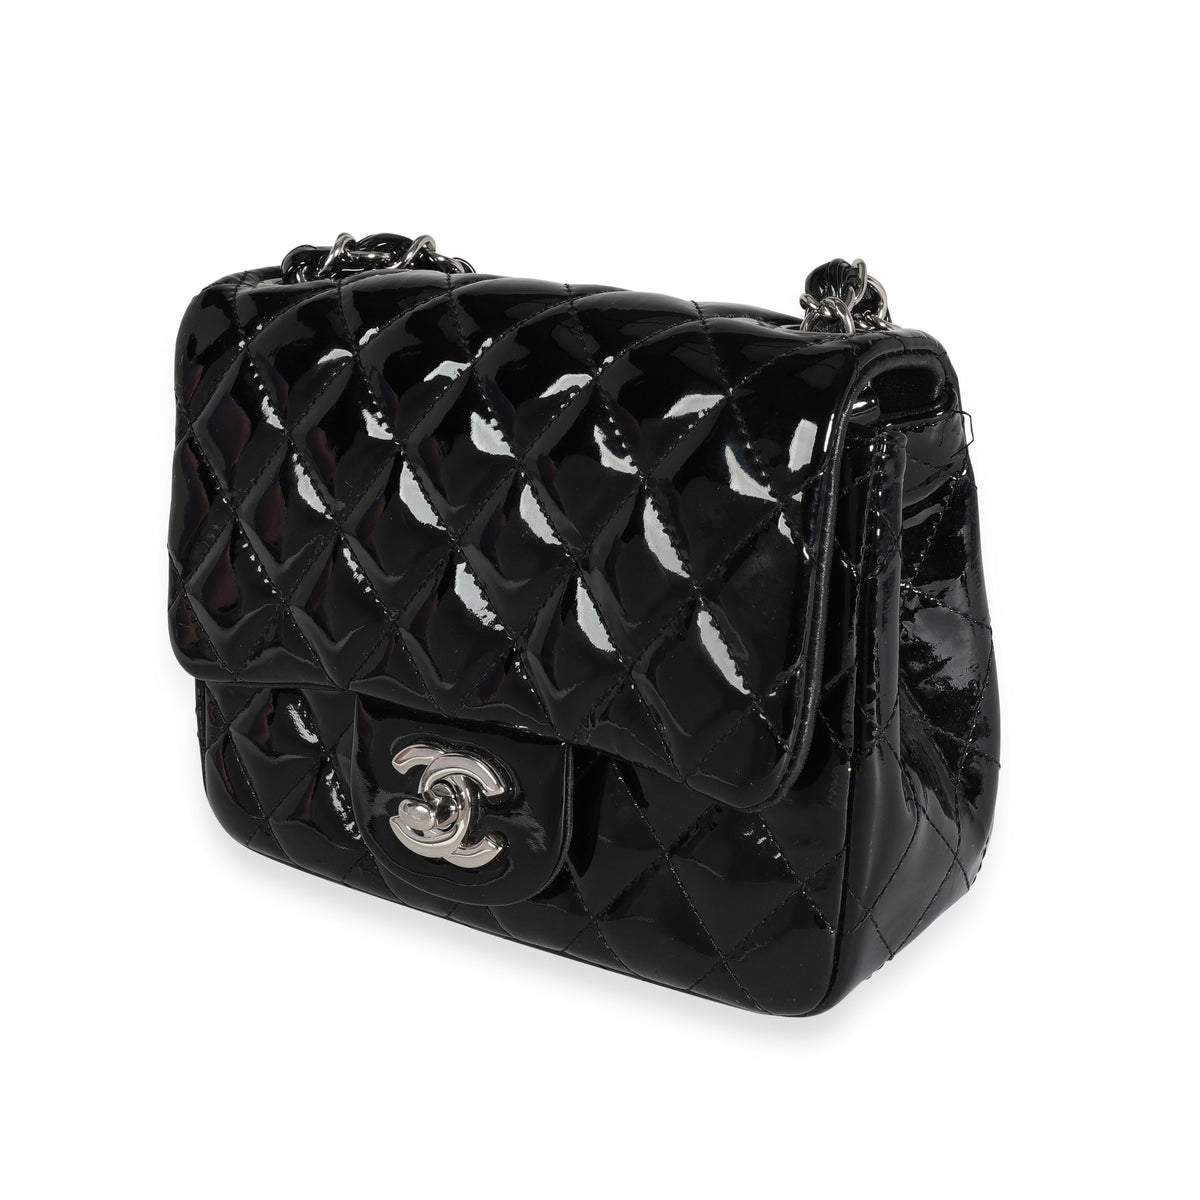 Chanel Black Quilted Patent Leather Classic Square Mini Flap Bag, myGemma